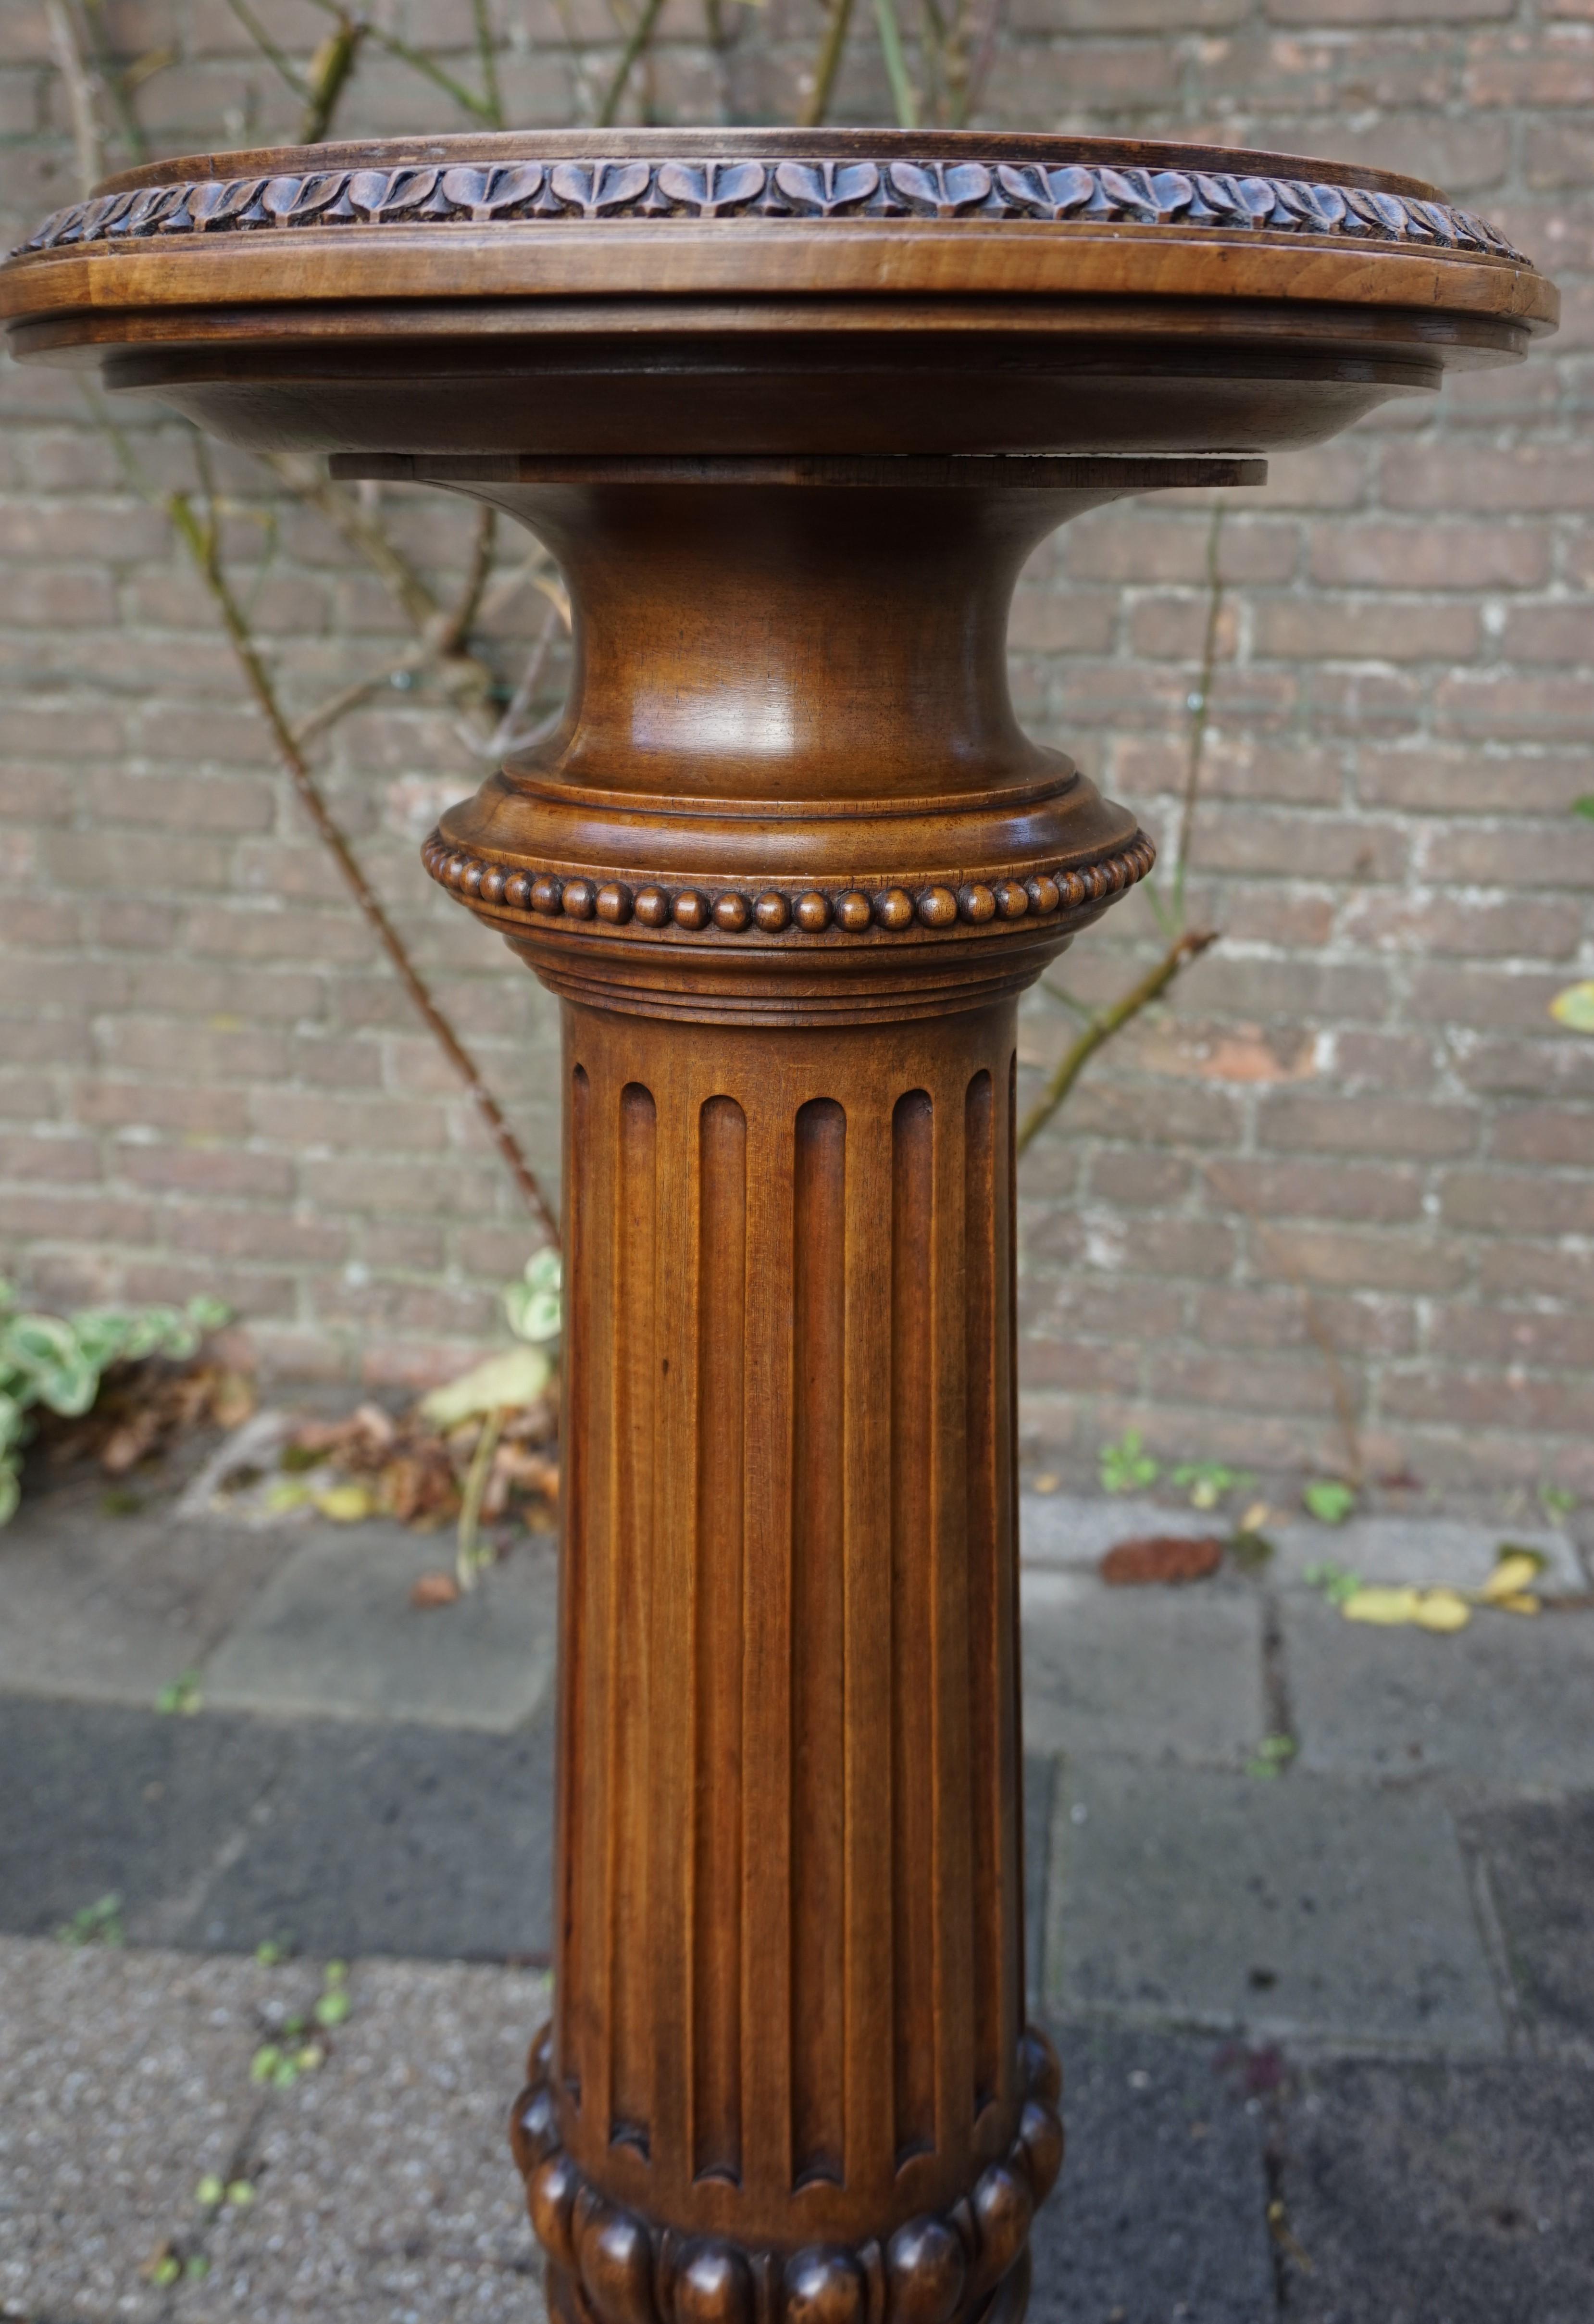 Stunning classical style display column with warm patina.

This marvelous piece of late 19th century workmanship is another fine example of the quality that was made in those days. All hand-crafted out of solid walnut and beautifully patinated from